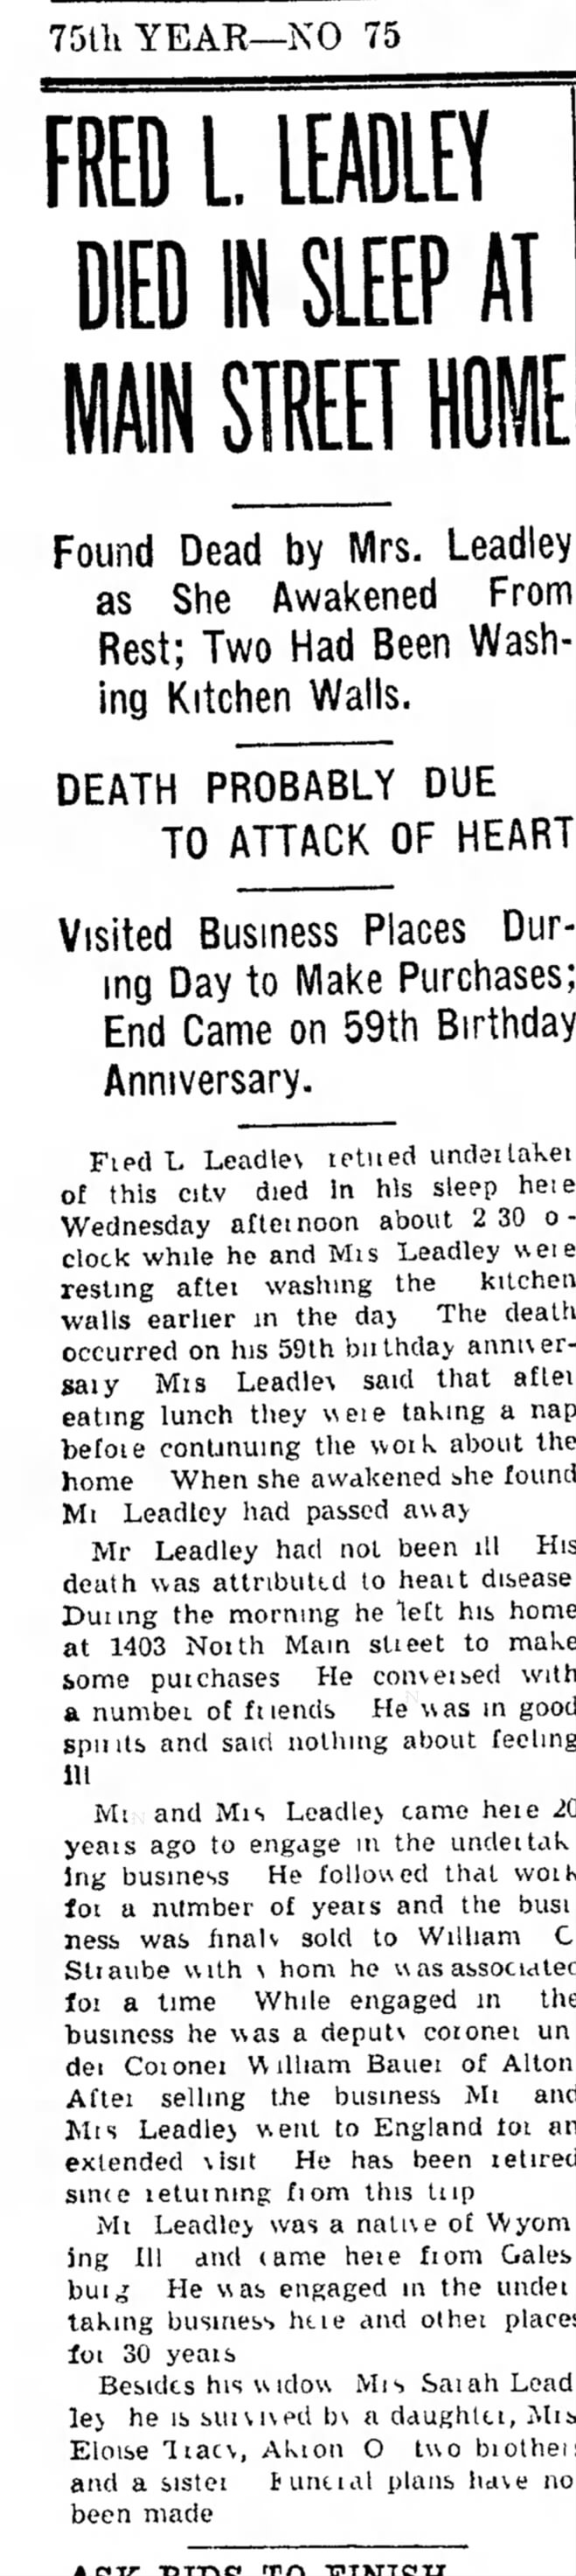 March 30, 1938
Fred Leadley Obituary